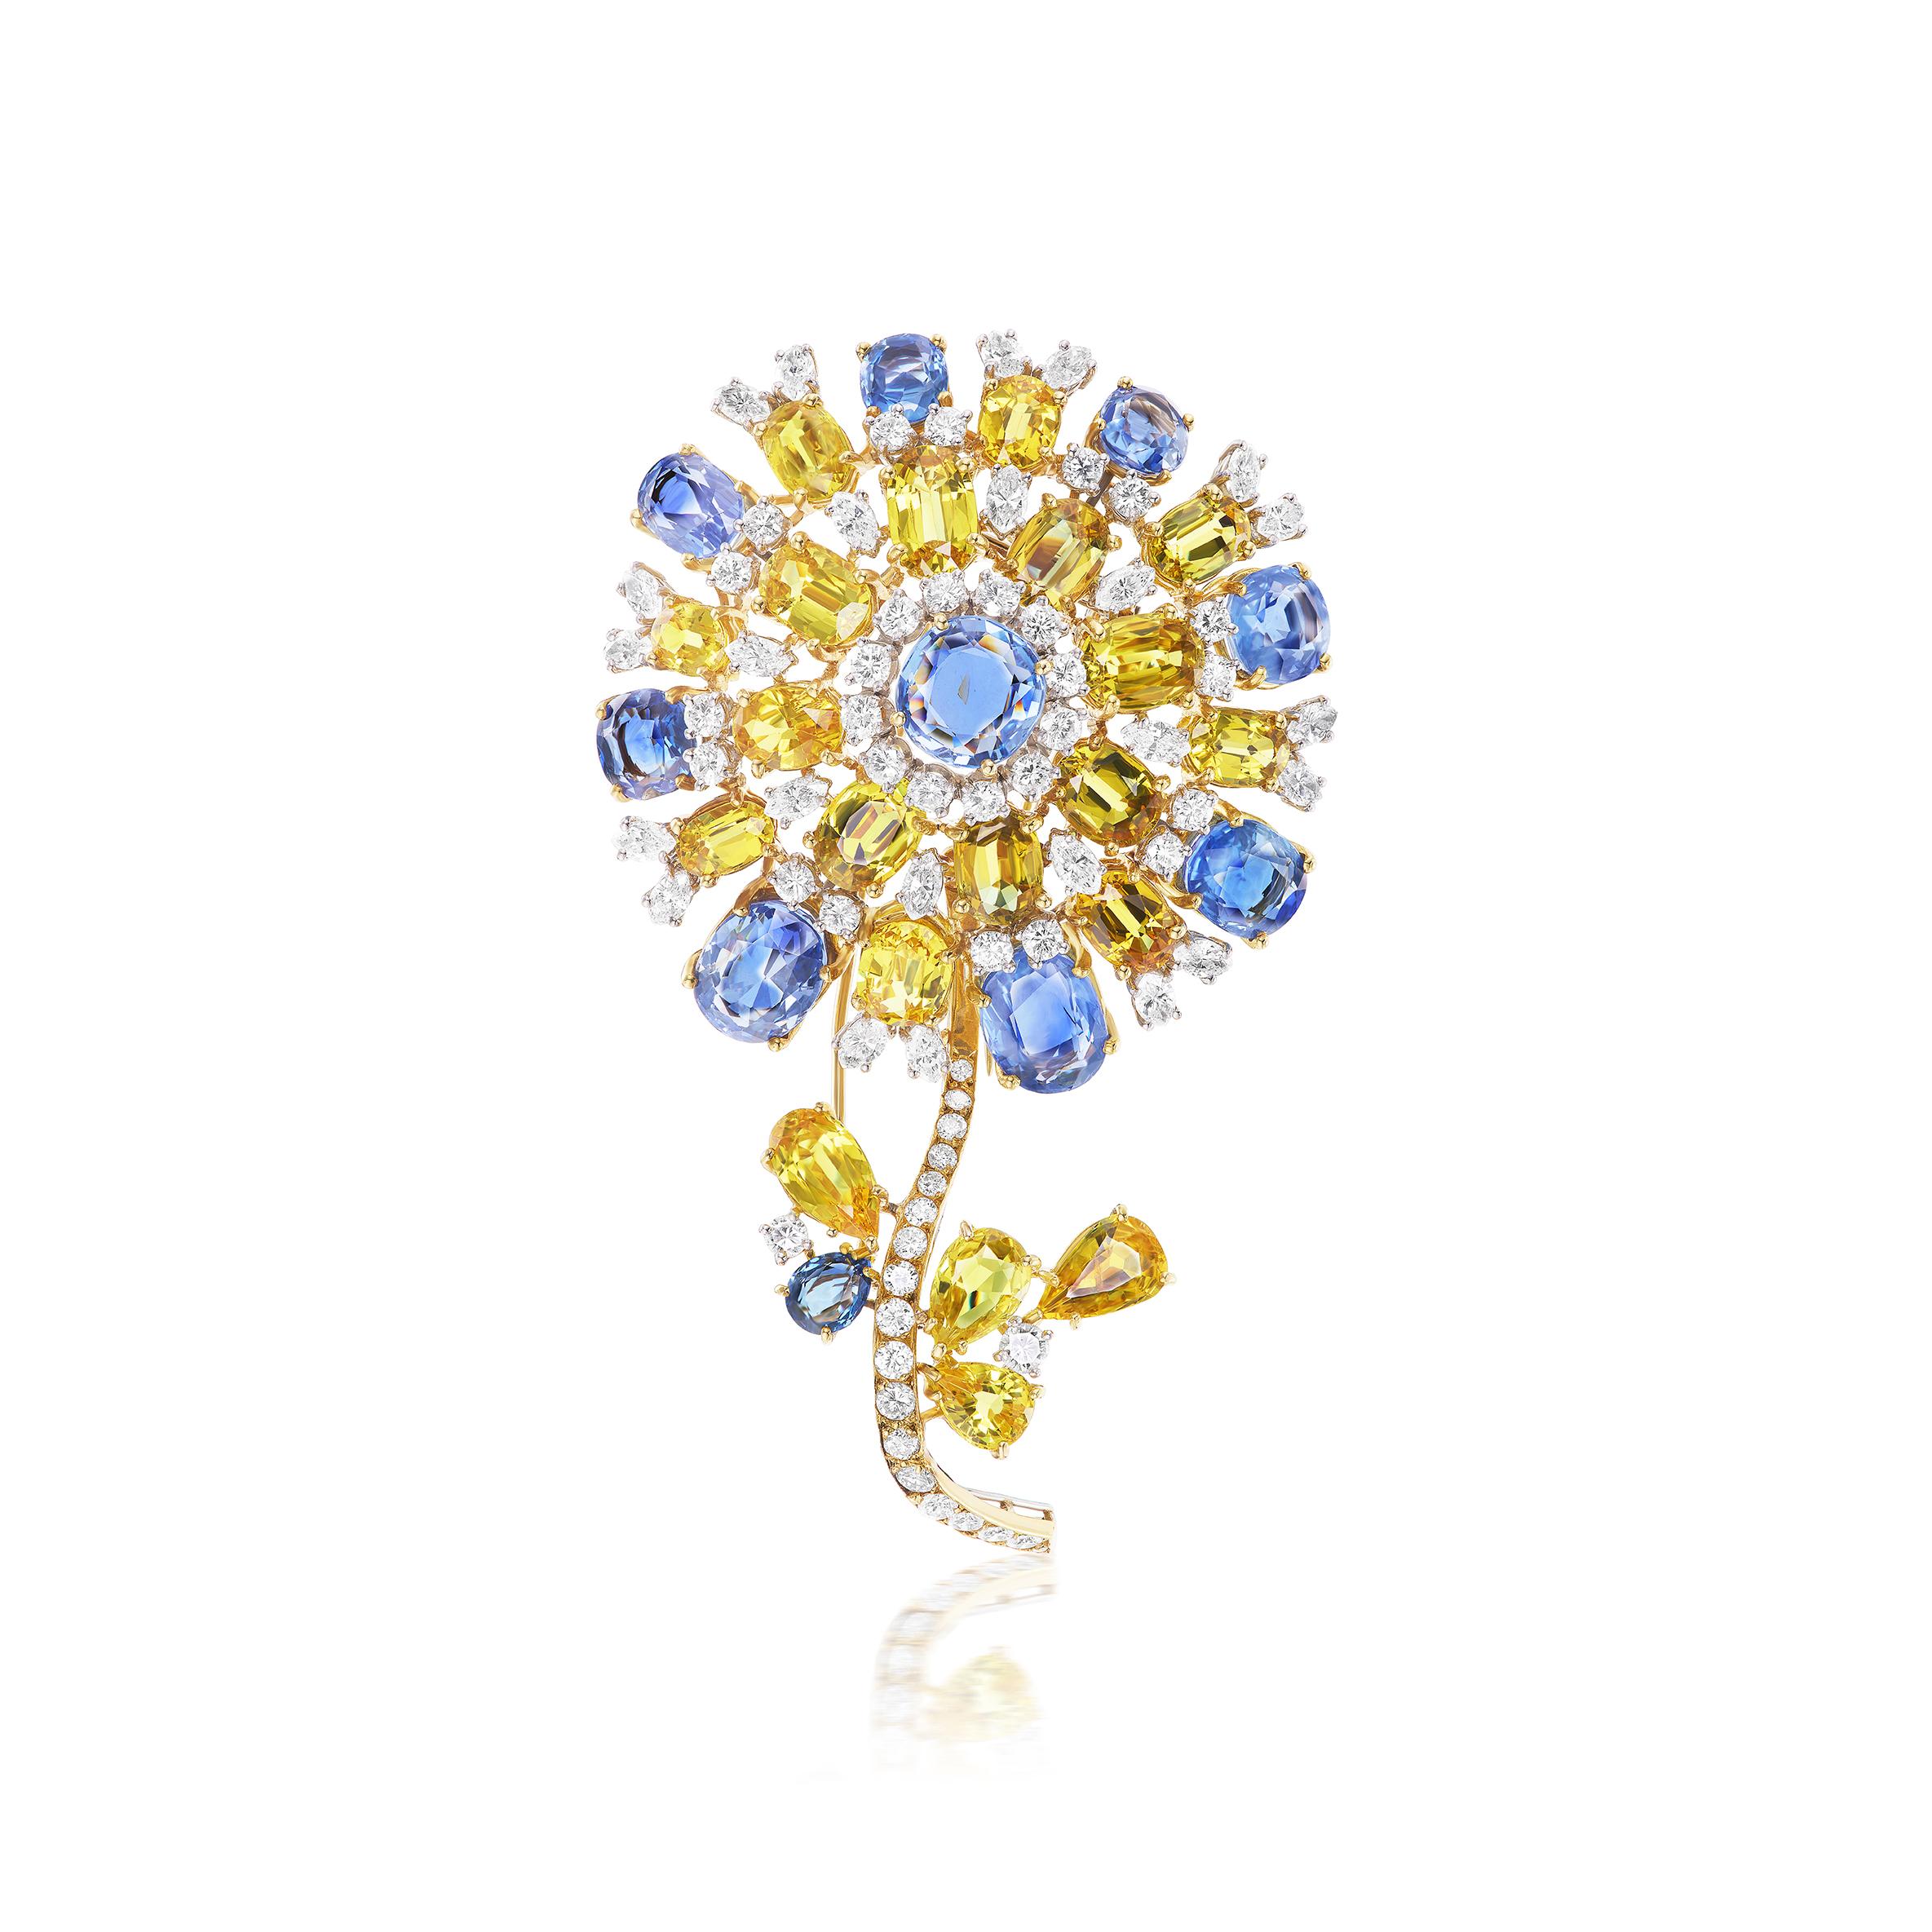 This magnificent and impressive brooch features 10 oval blue sapphires weighing approximately 24 carats, 20 mixed shape yellow sapphires weighing approximately 45 carats, and 24 marquise and 49 round brilliant diamonds weighing approximately 8